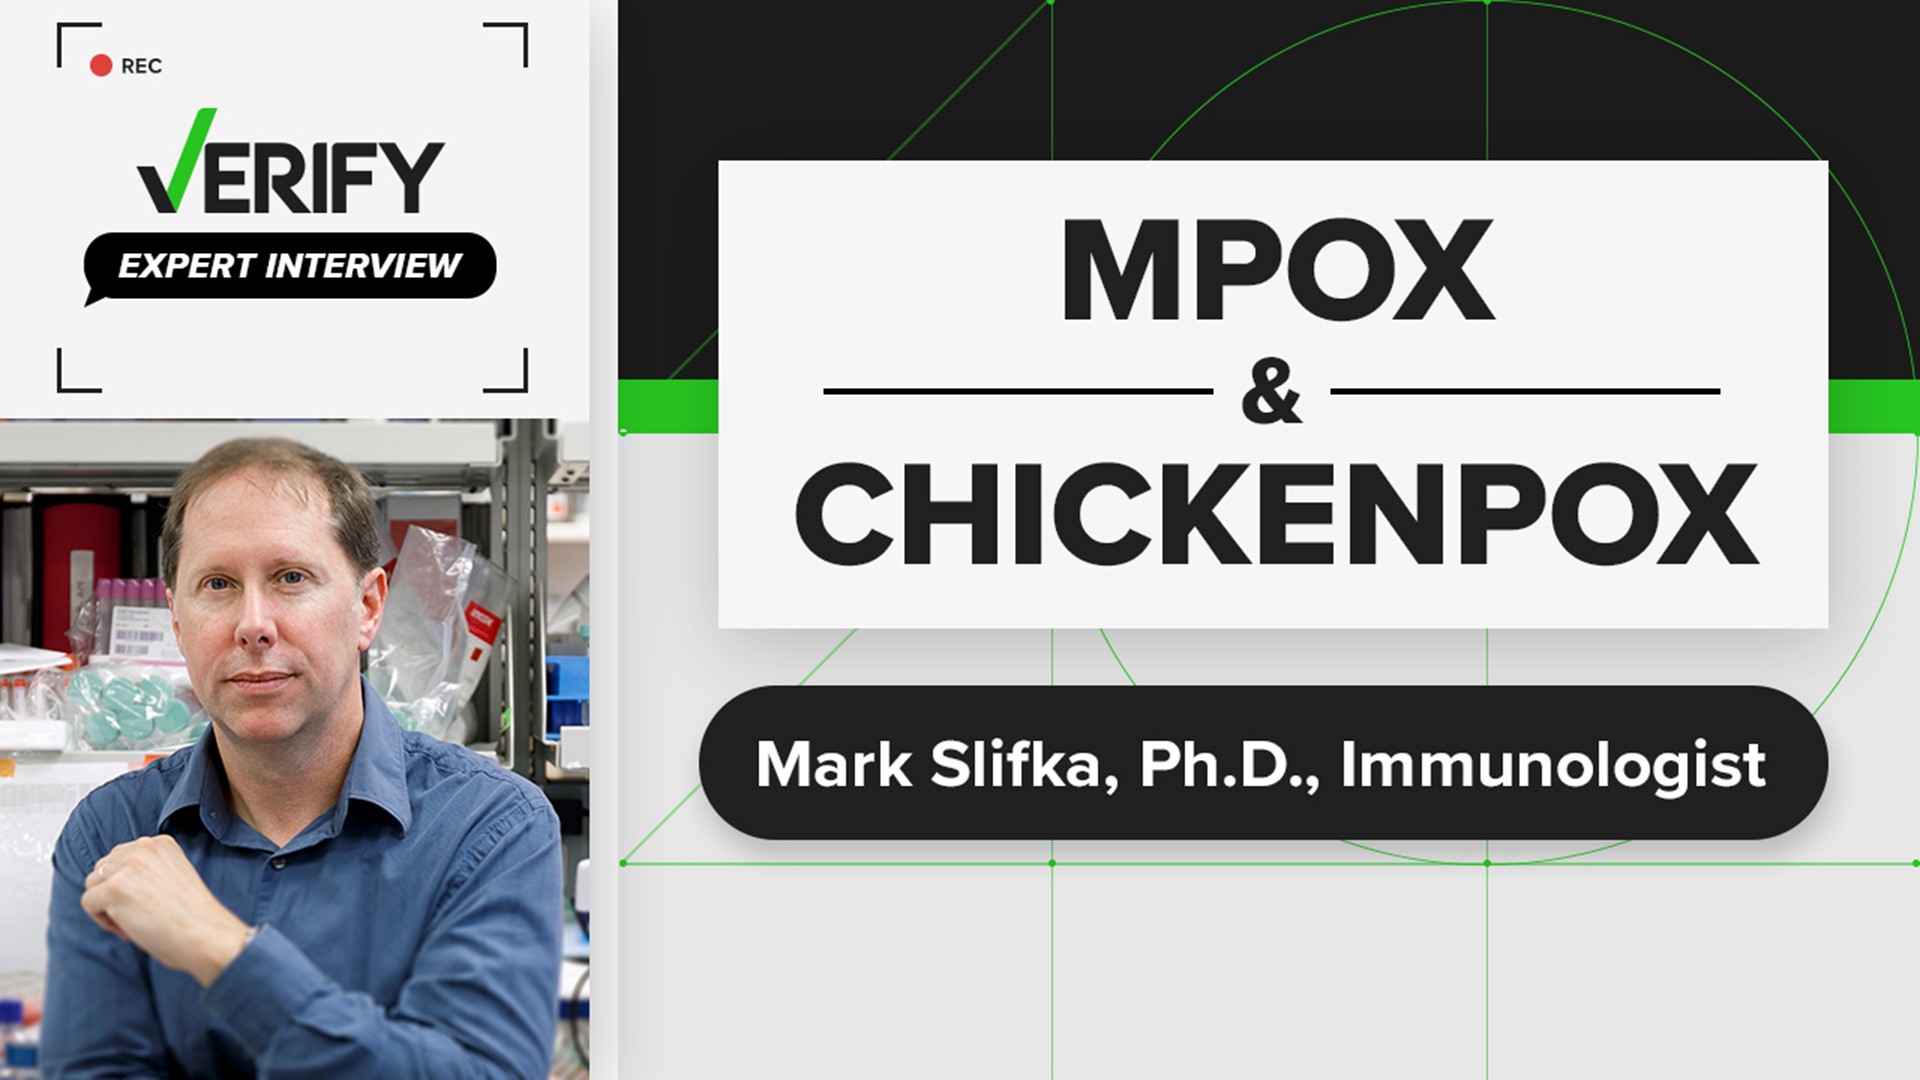 Immunologist Mark Slifka, Ph.D., talks about chickenpox and mpox. As well as mortality rate, people who could be most at risk and the greatest risk of exposure.